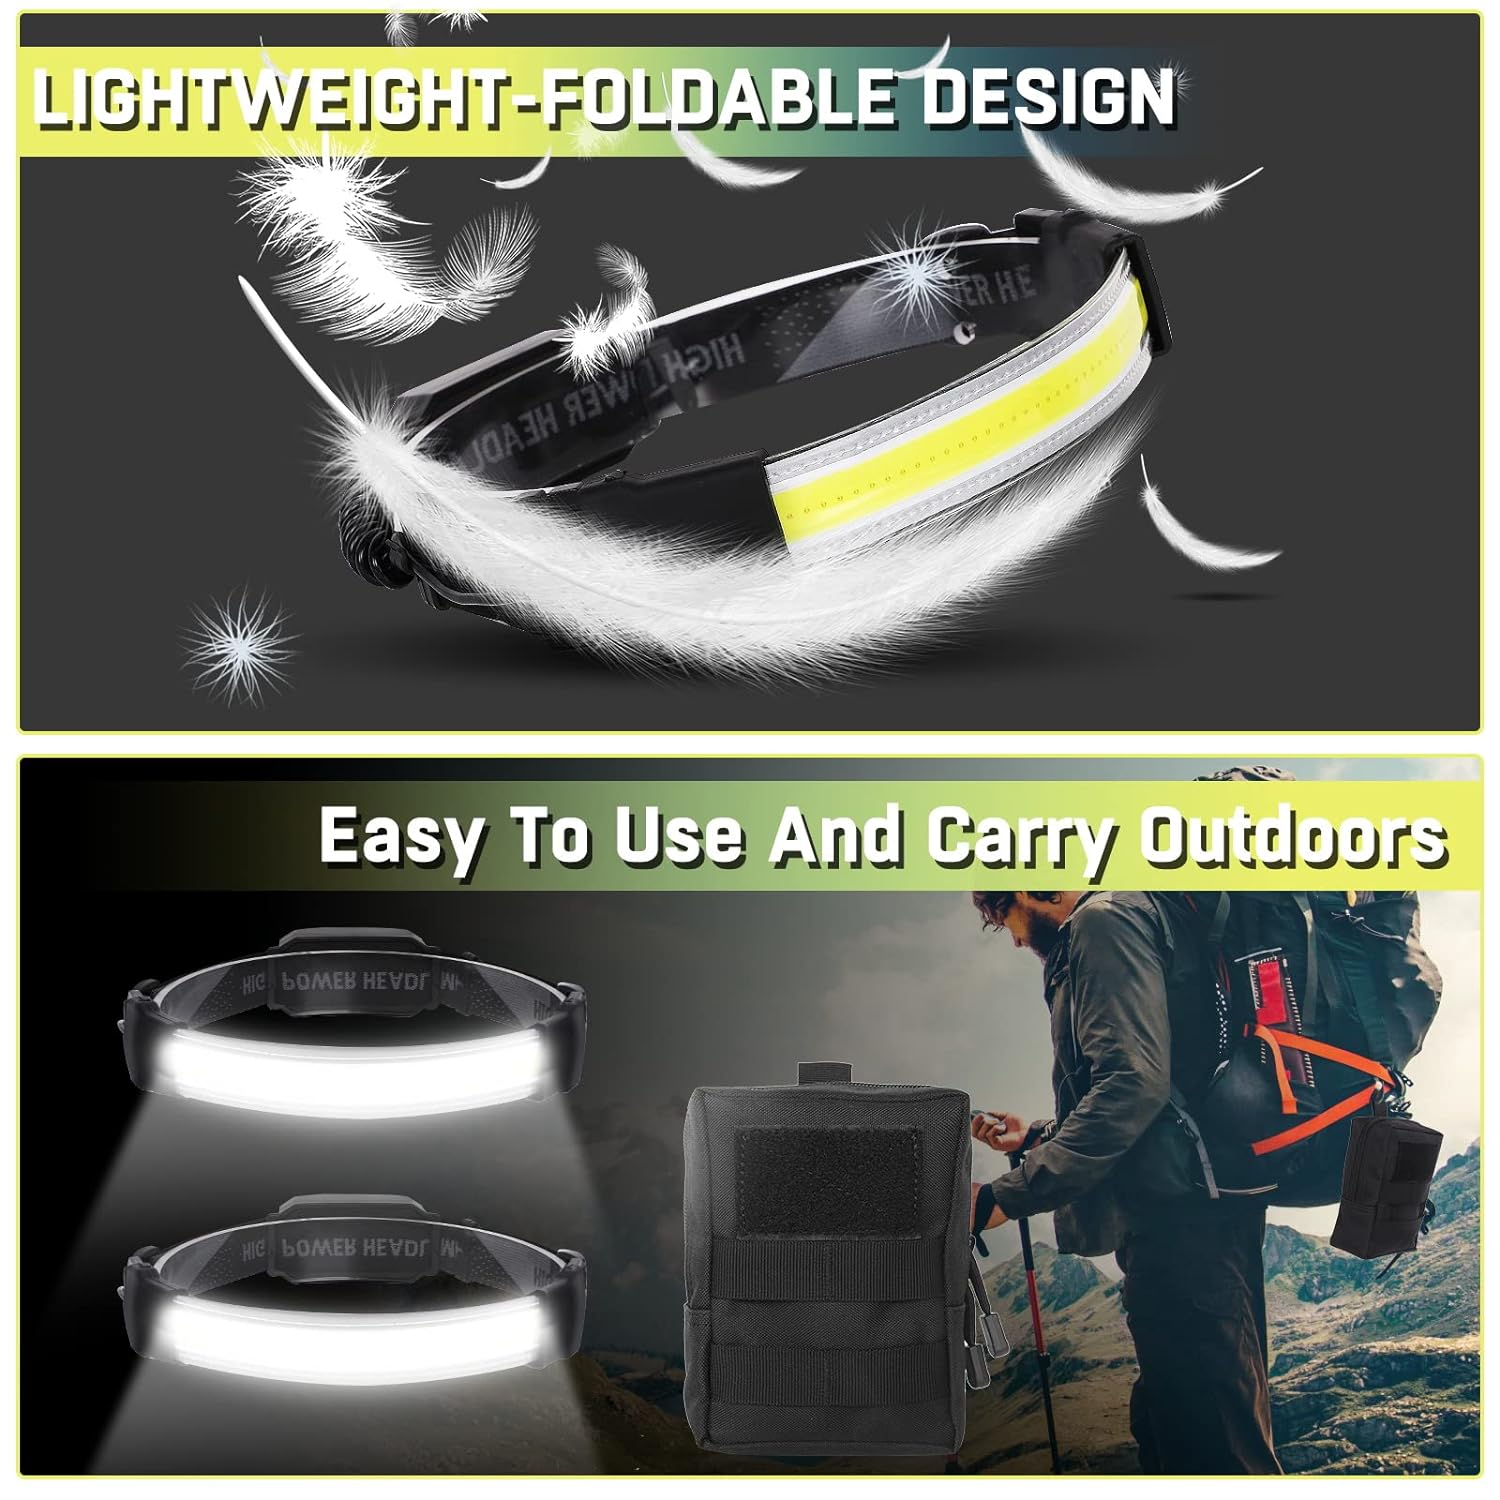 LED Headlamp 2 Pack,Super Bright 1500Lumen 6 Modes USB Rechargeable Headlamp with Tail Red Light(Individual Control),Wide Beam Illumination Waterproof Headlamp for Outdoor Running Hunting Camping Gear